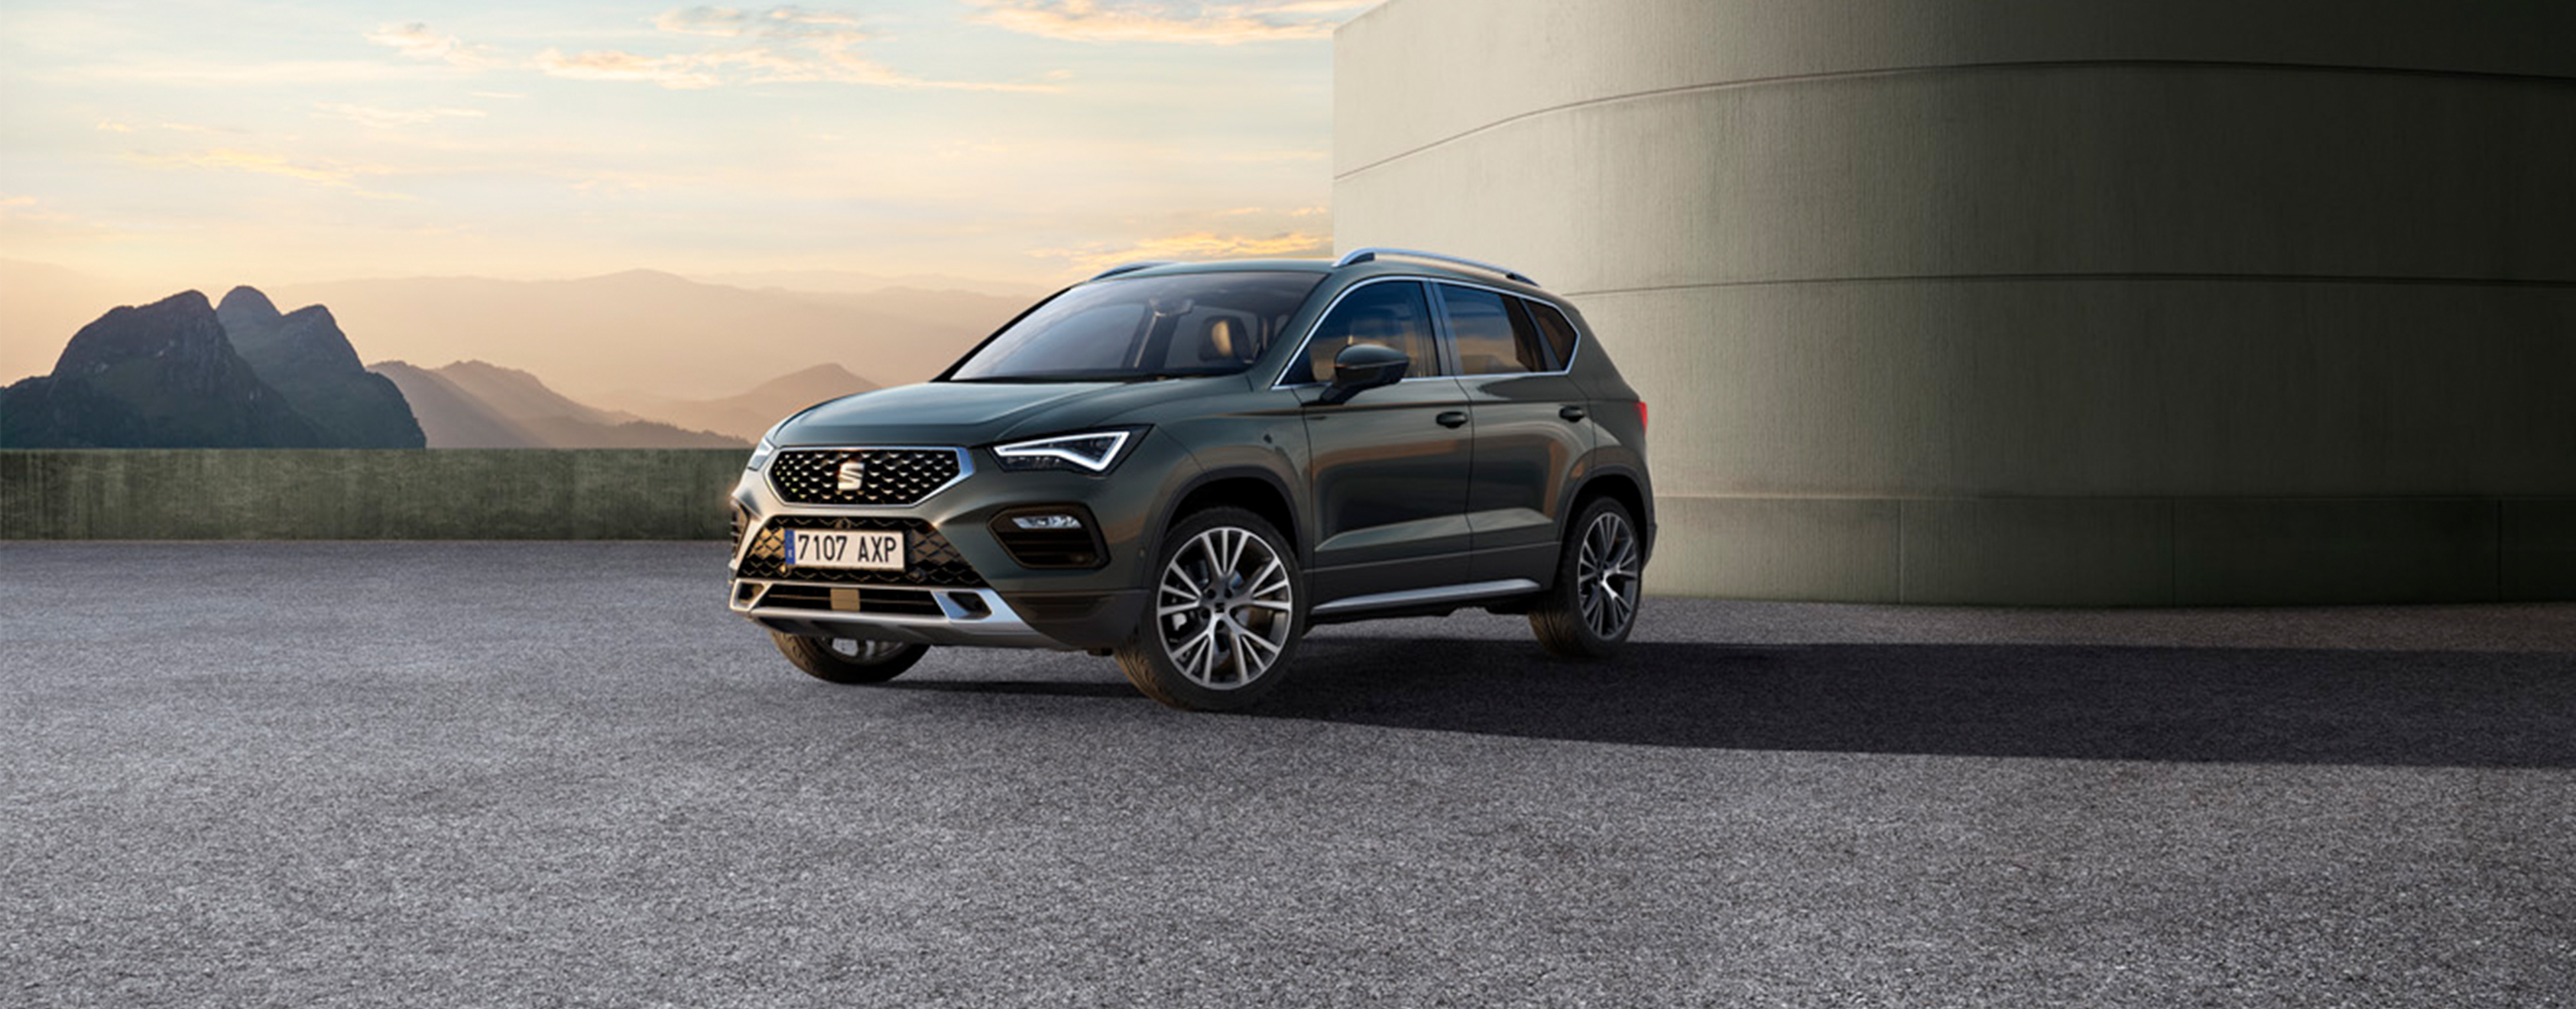 new SEAT Ateca from the rear